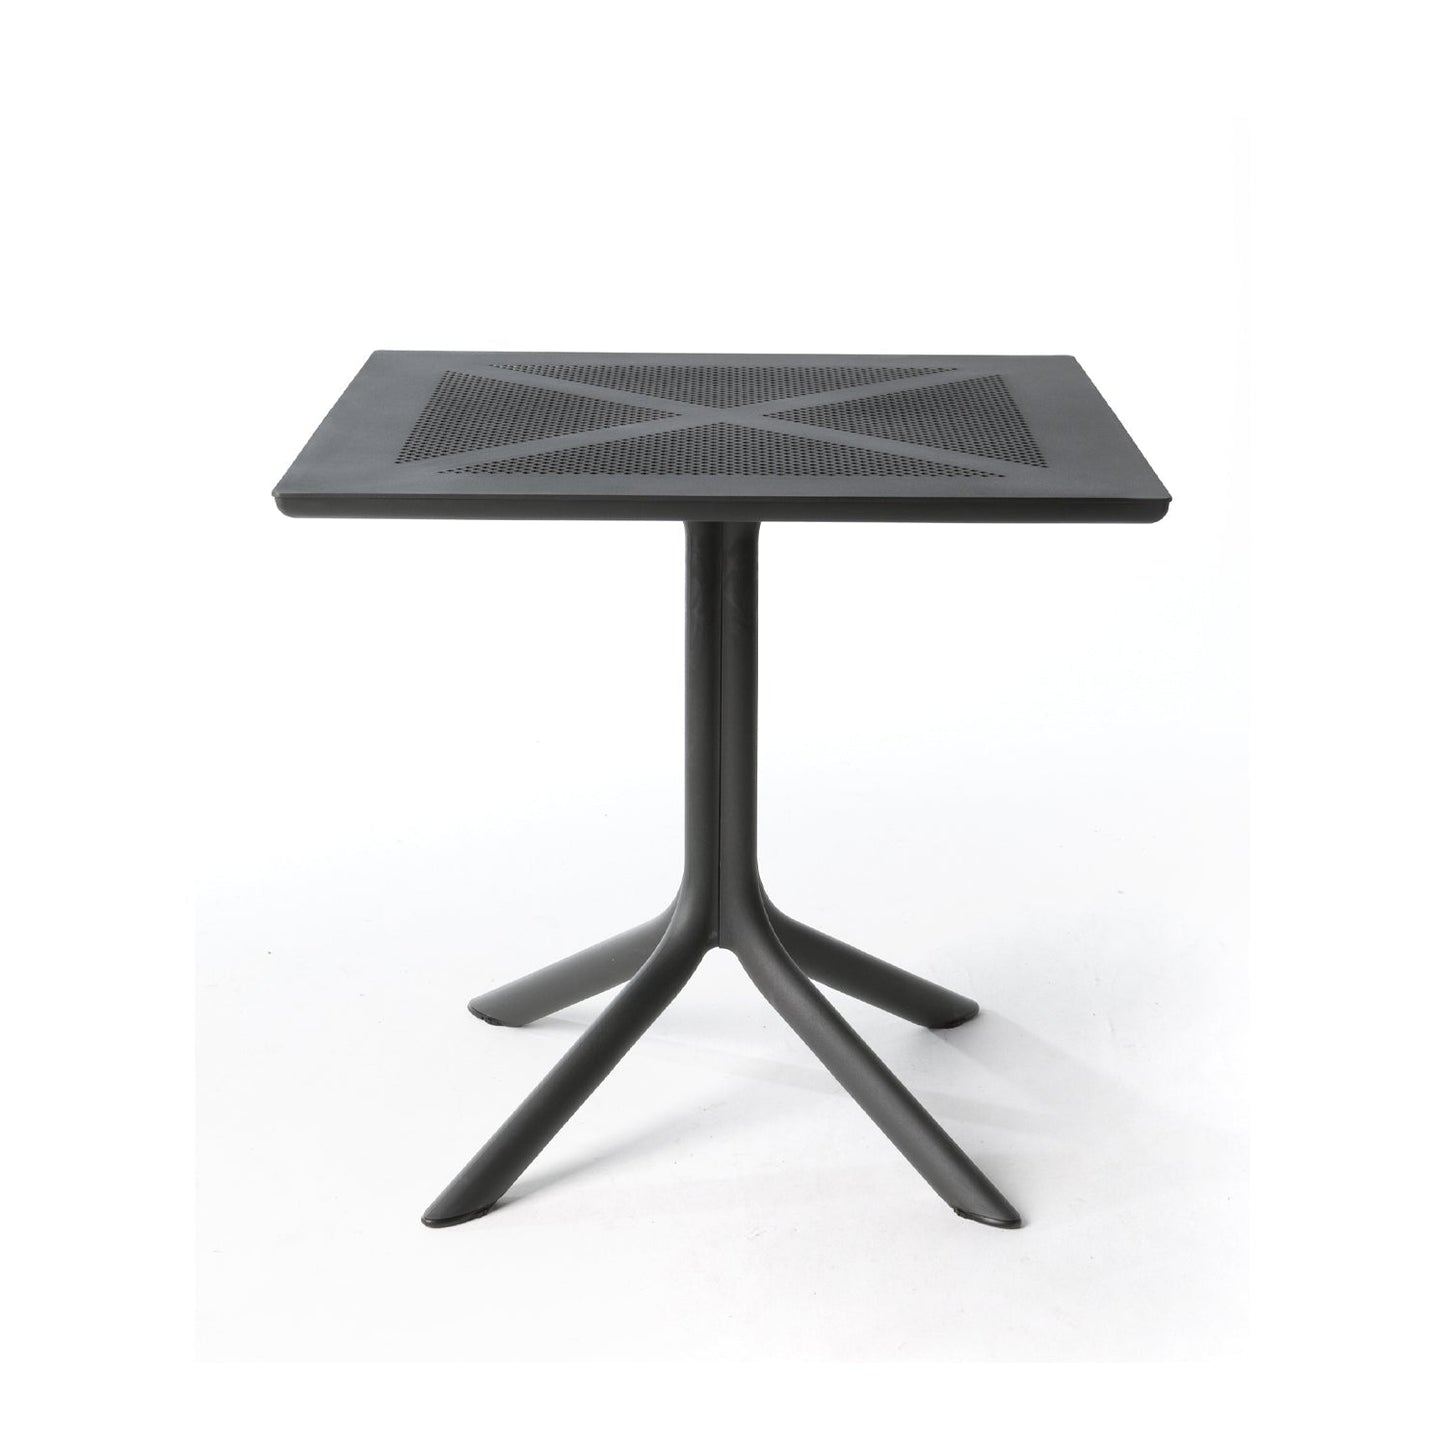 ClipX 70 Garden Table By Nardi In Anthracite